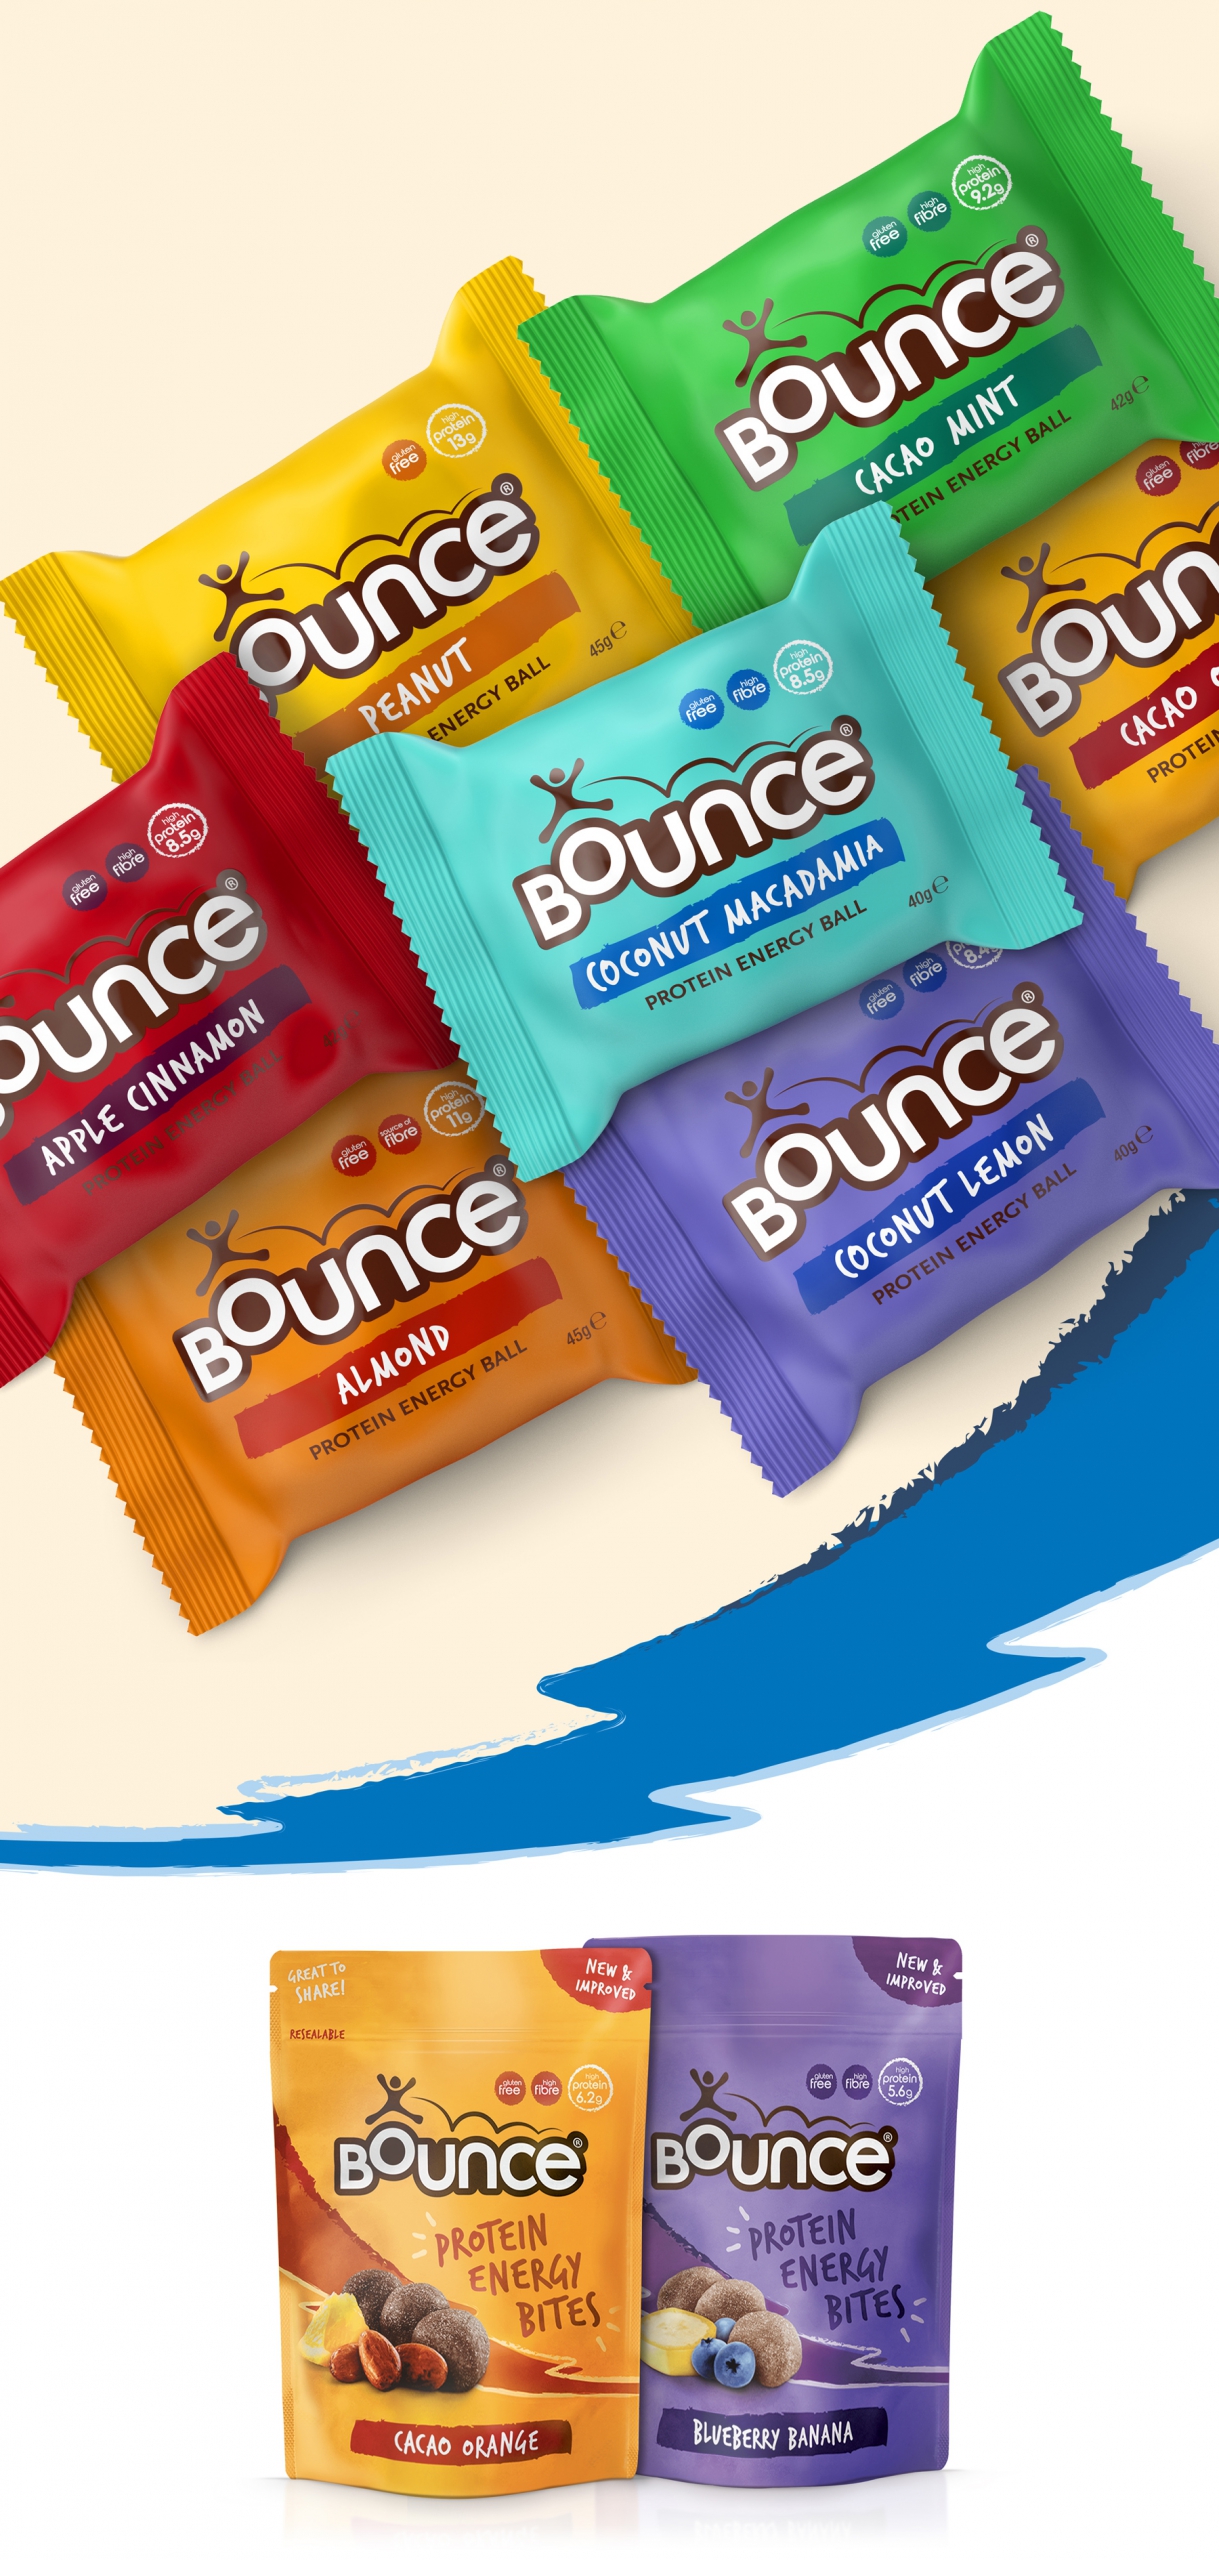 Brand identity snack packaging design for Bounce by Biles Hendry